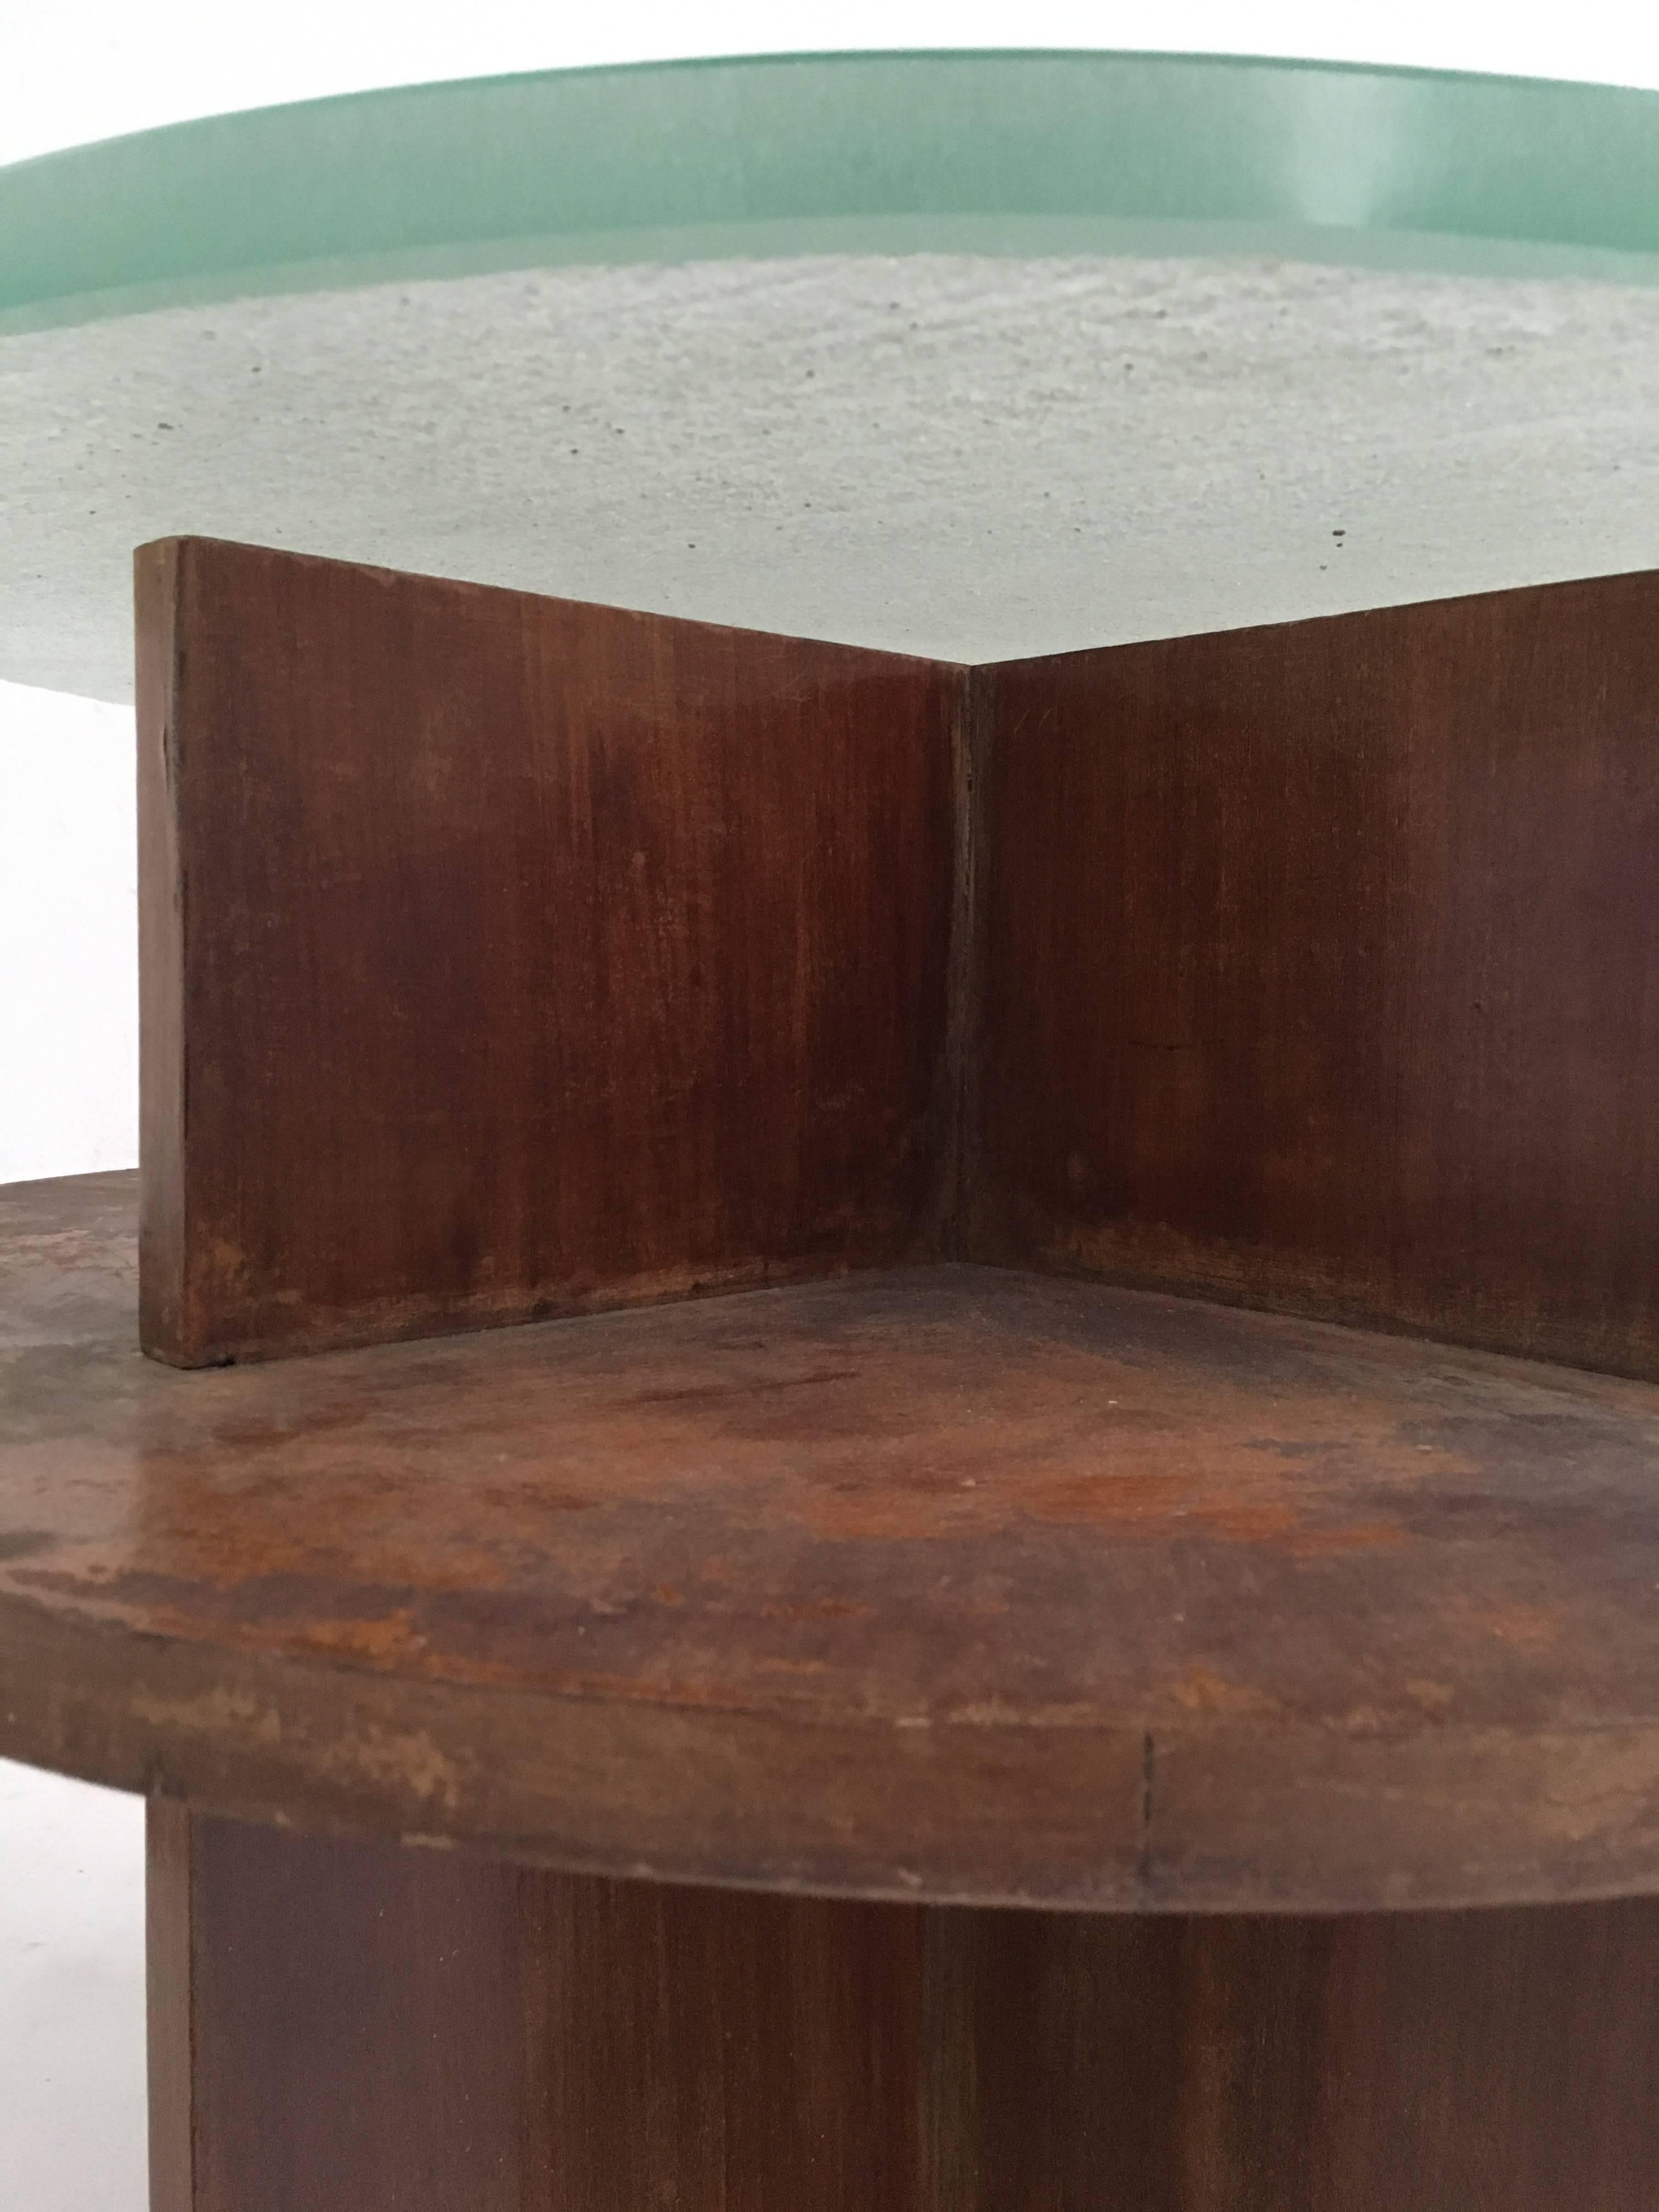 Hand-Crafted 1939 Gerrit Rietveld Table for Bank Hypothecair Crediet The Hague Museum Quality